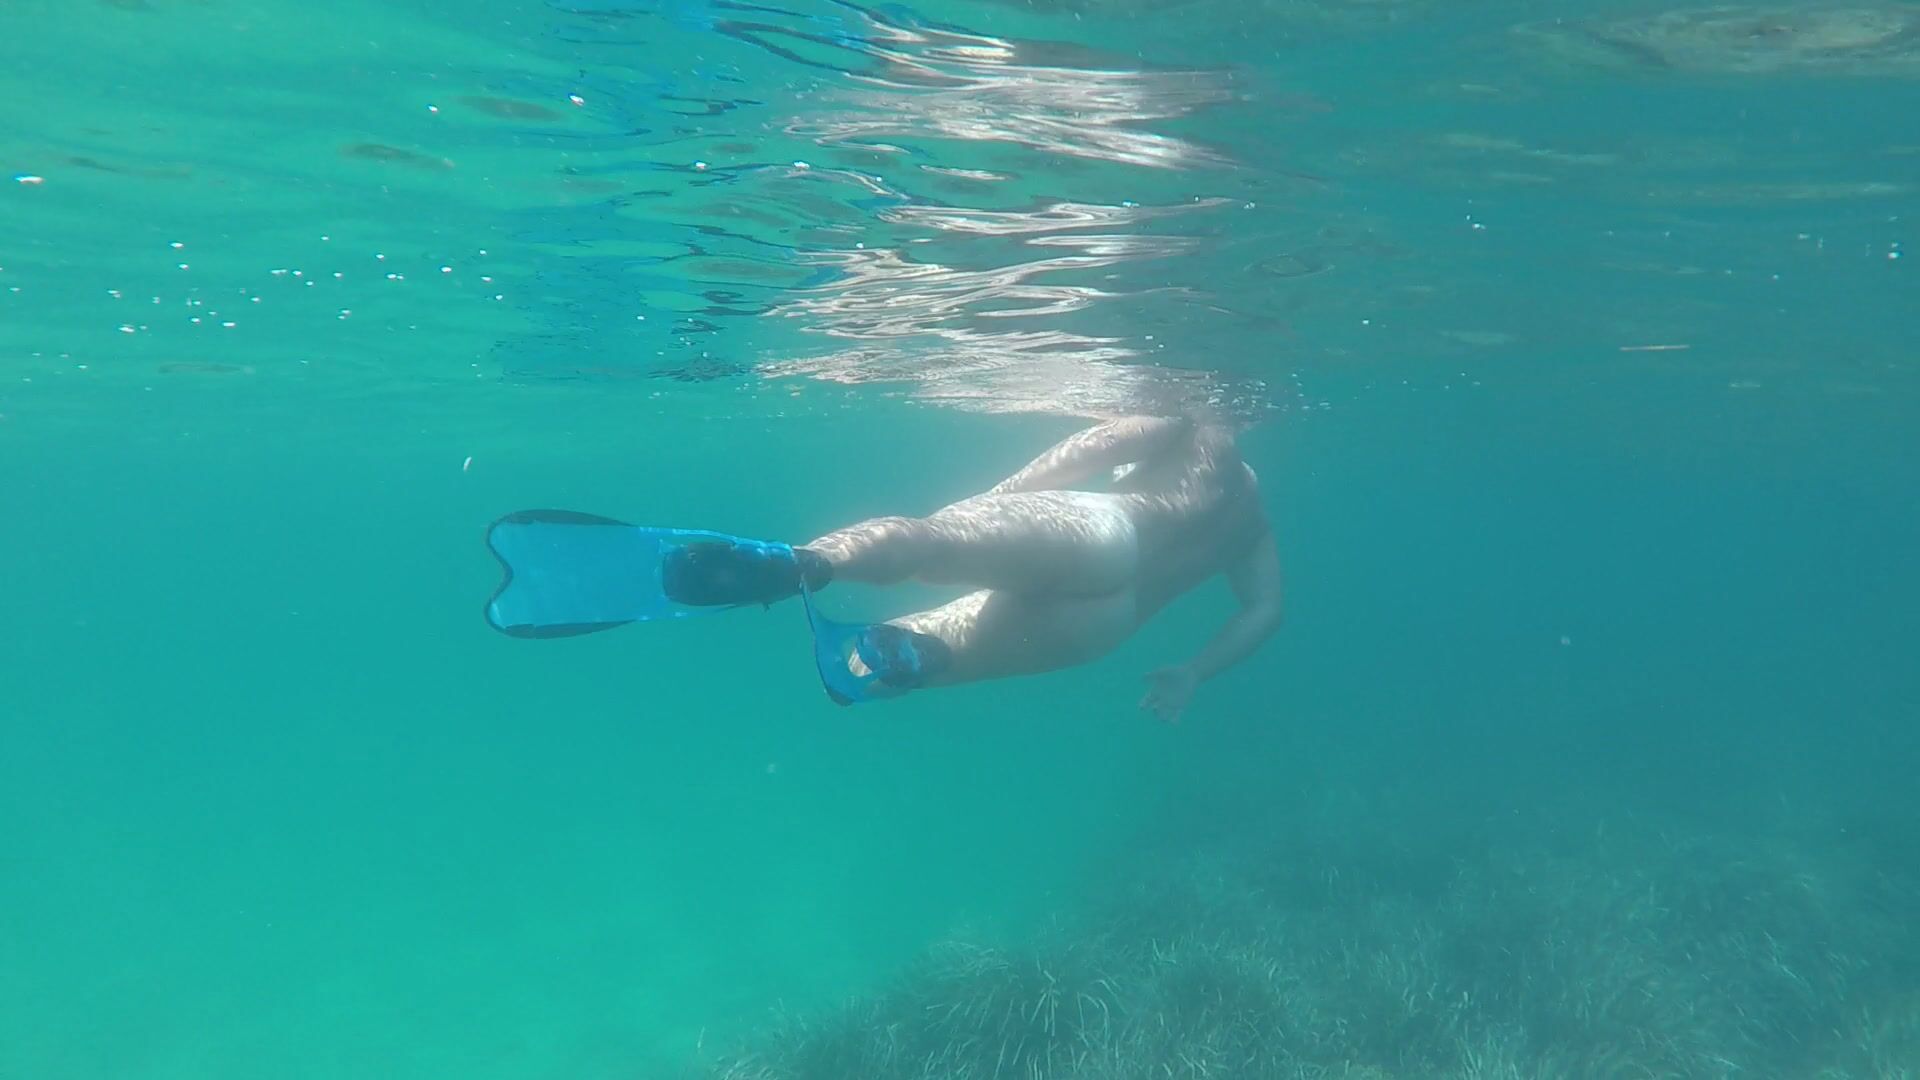 Fooling around naked under water.